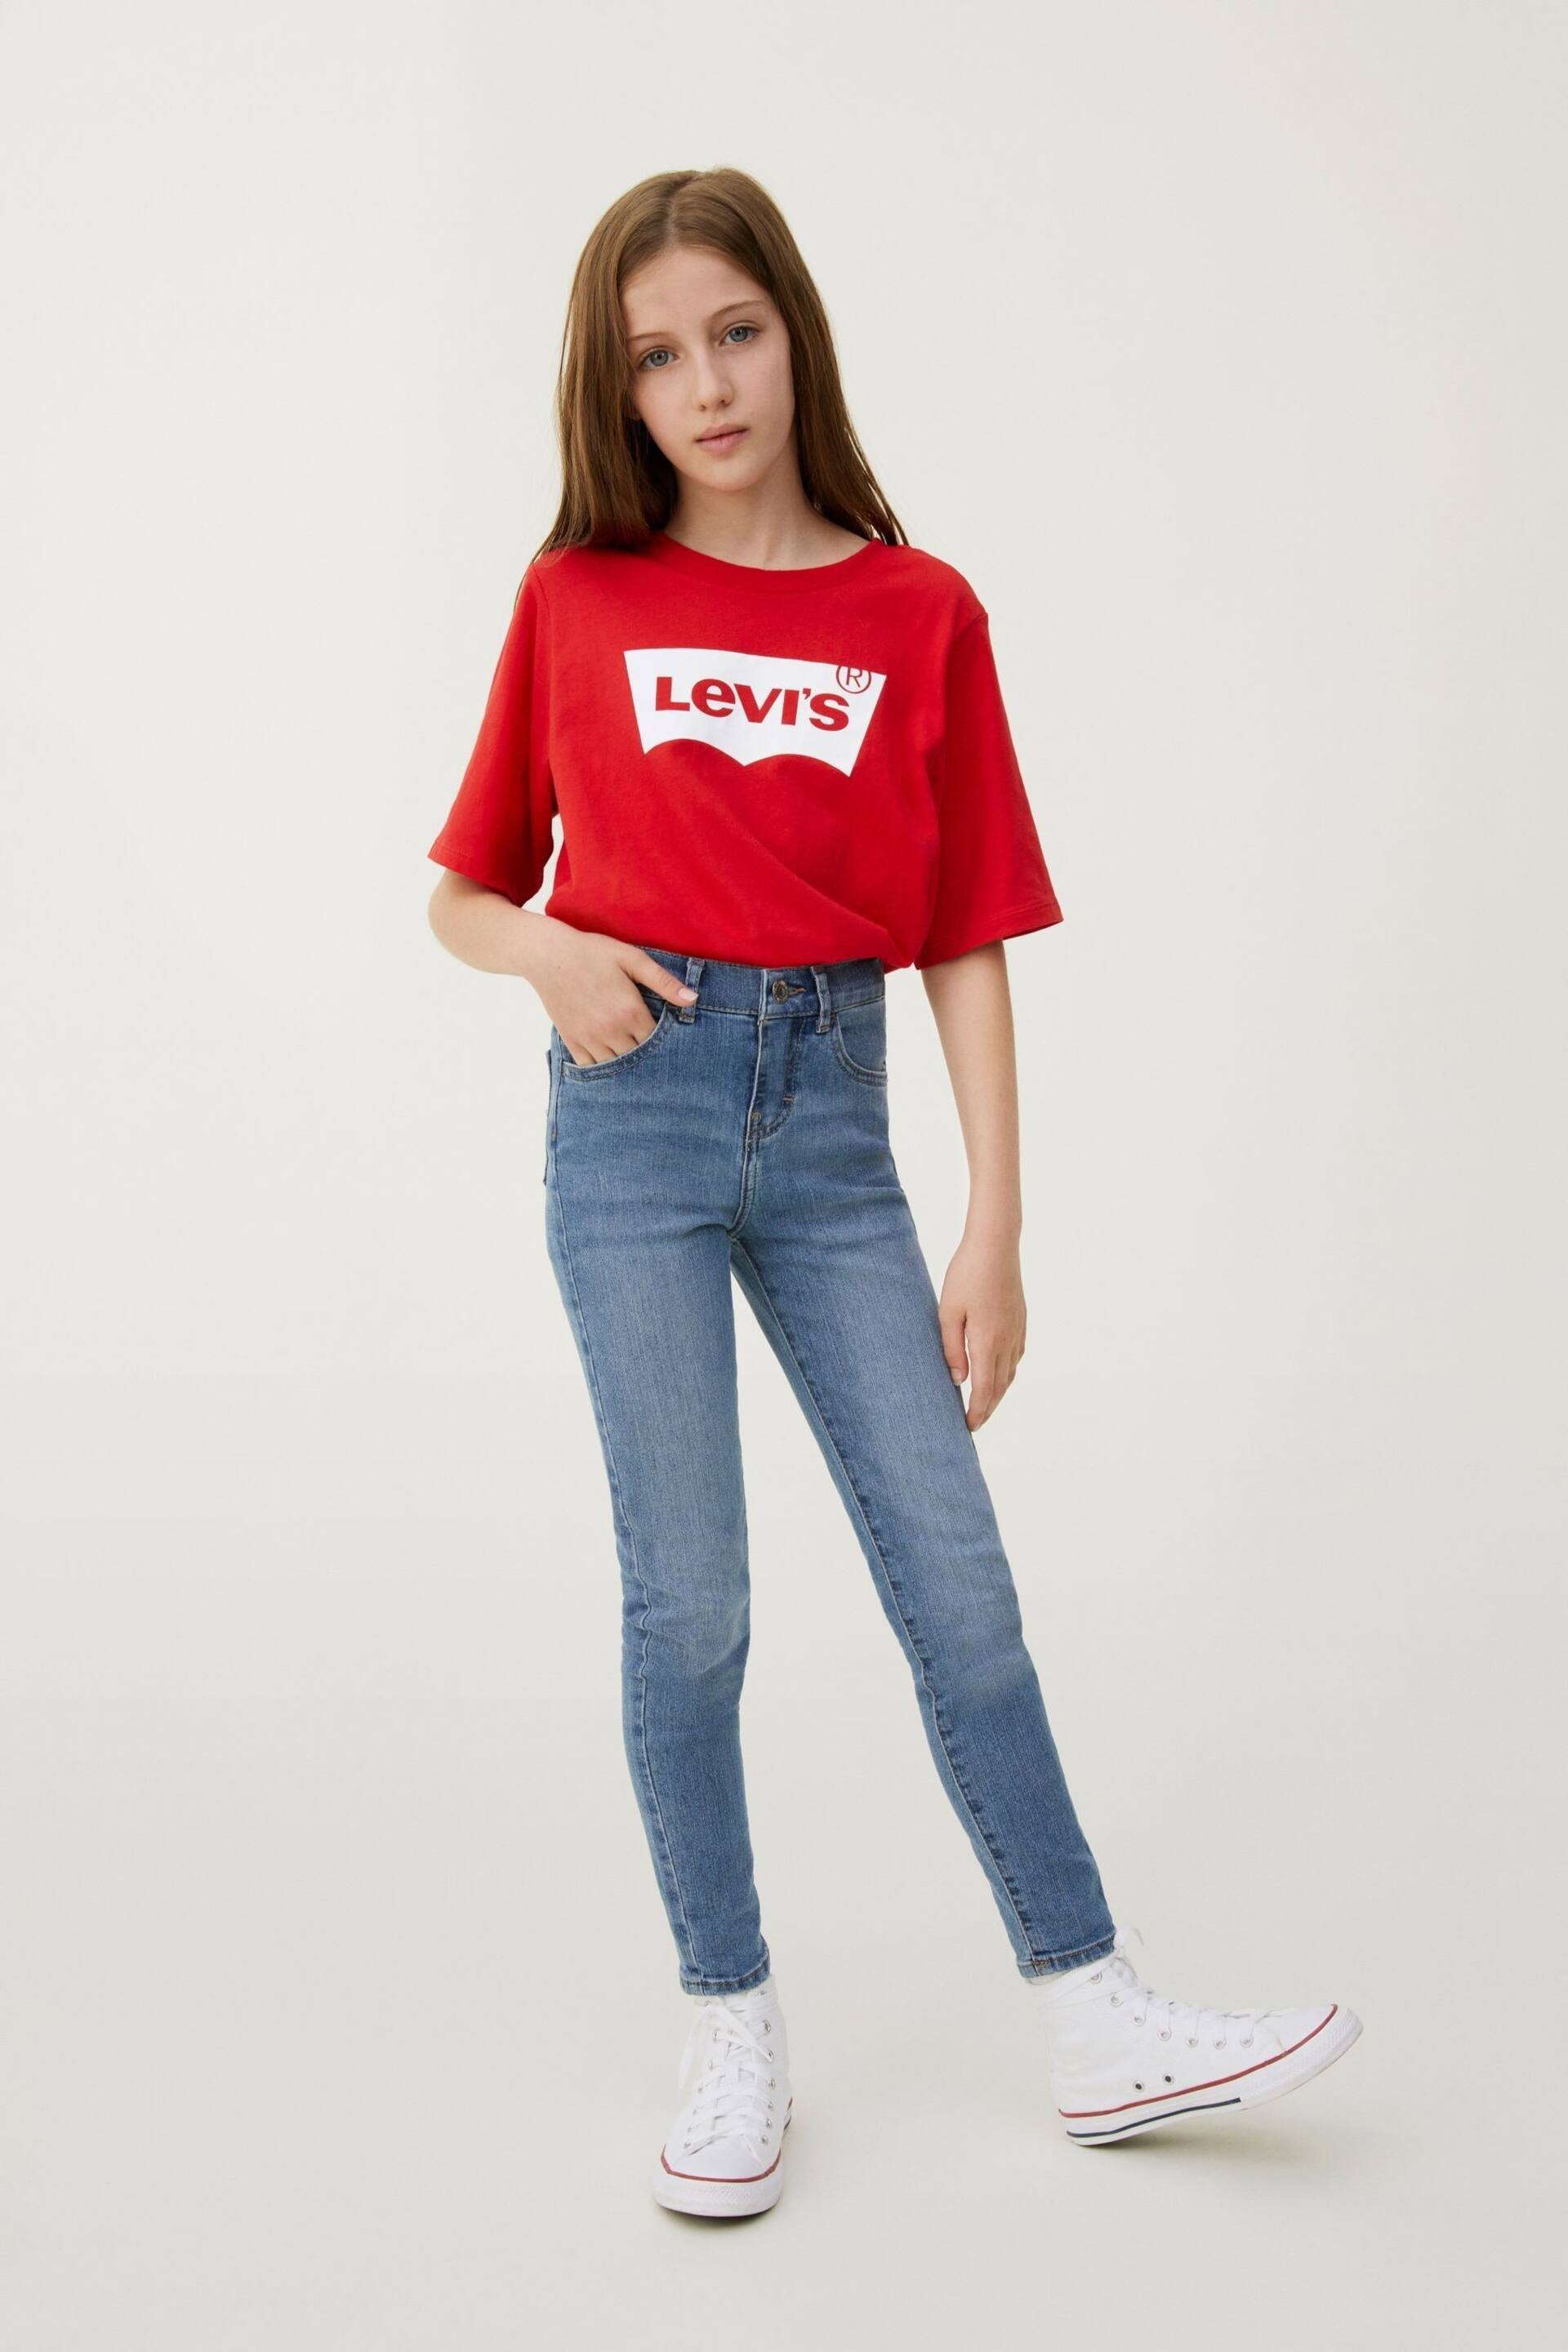 Levi's® Red High Rise Cropped Batwing Logo T-Shirt - Image 2 of 8